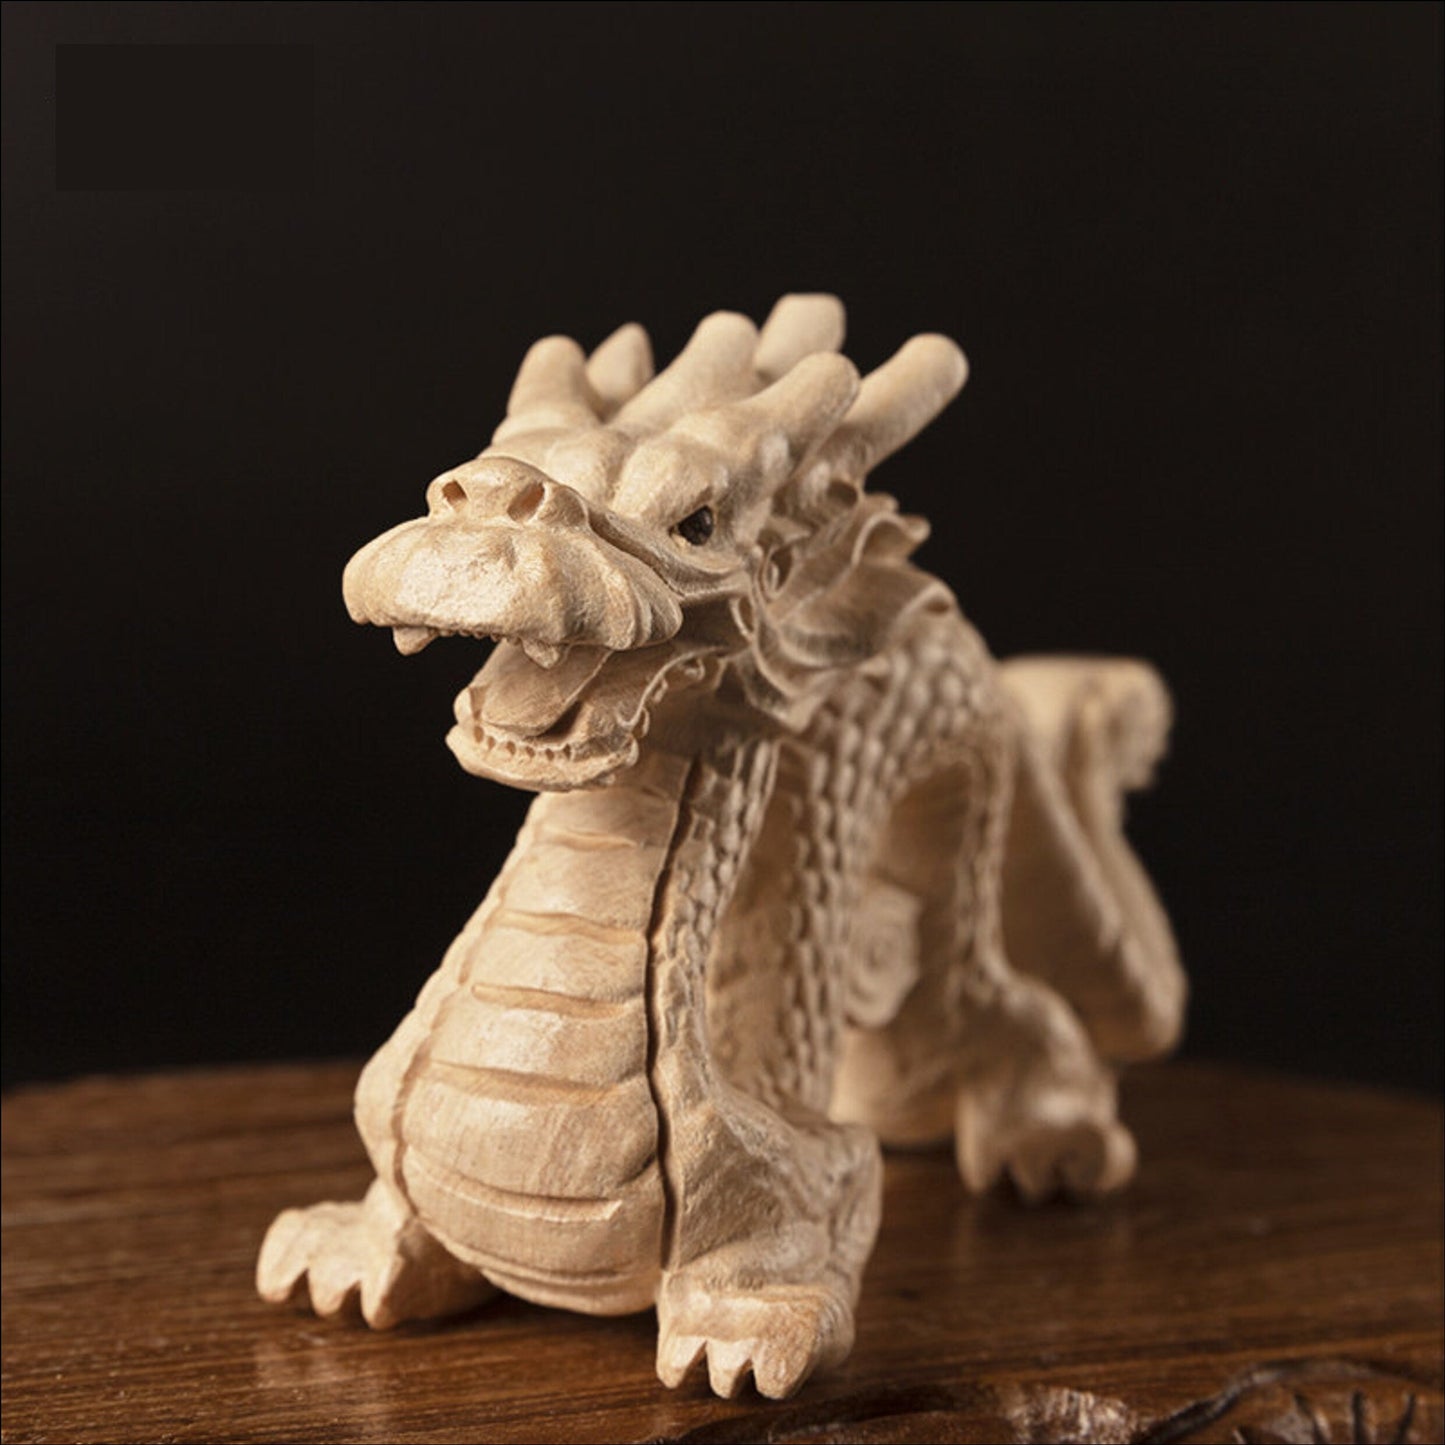 Wood Craft Dragon Sculpture & Statue | Fengshui | Good Fortune and Prosperity | Home and Office Display｜Mahogany Wood